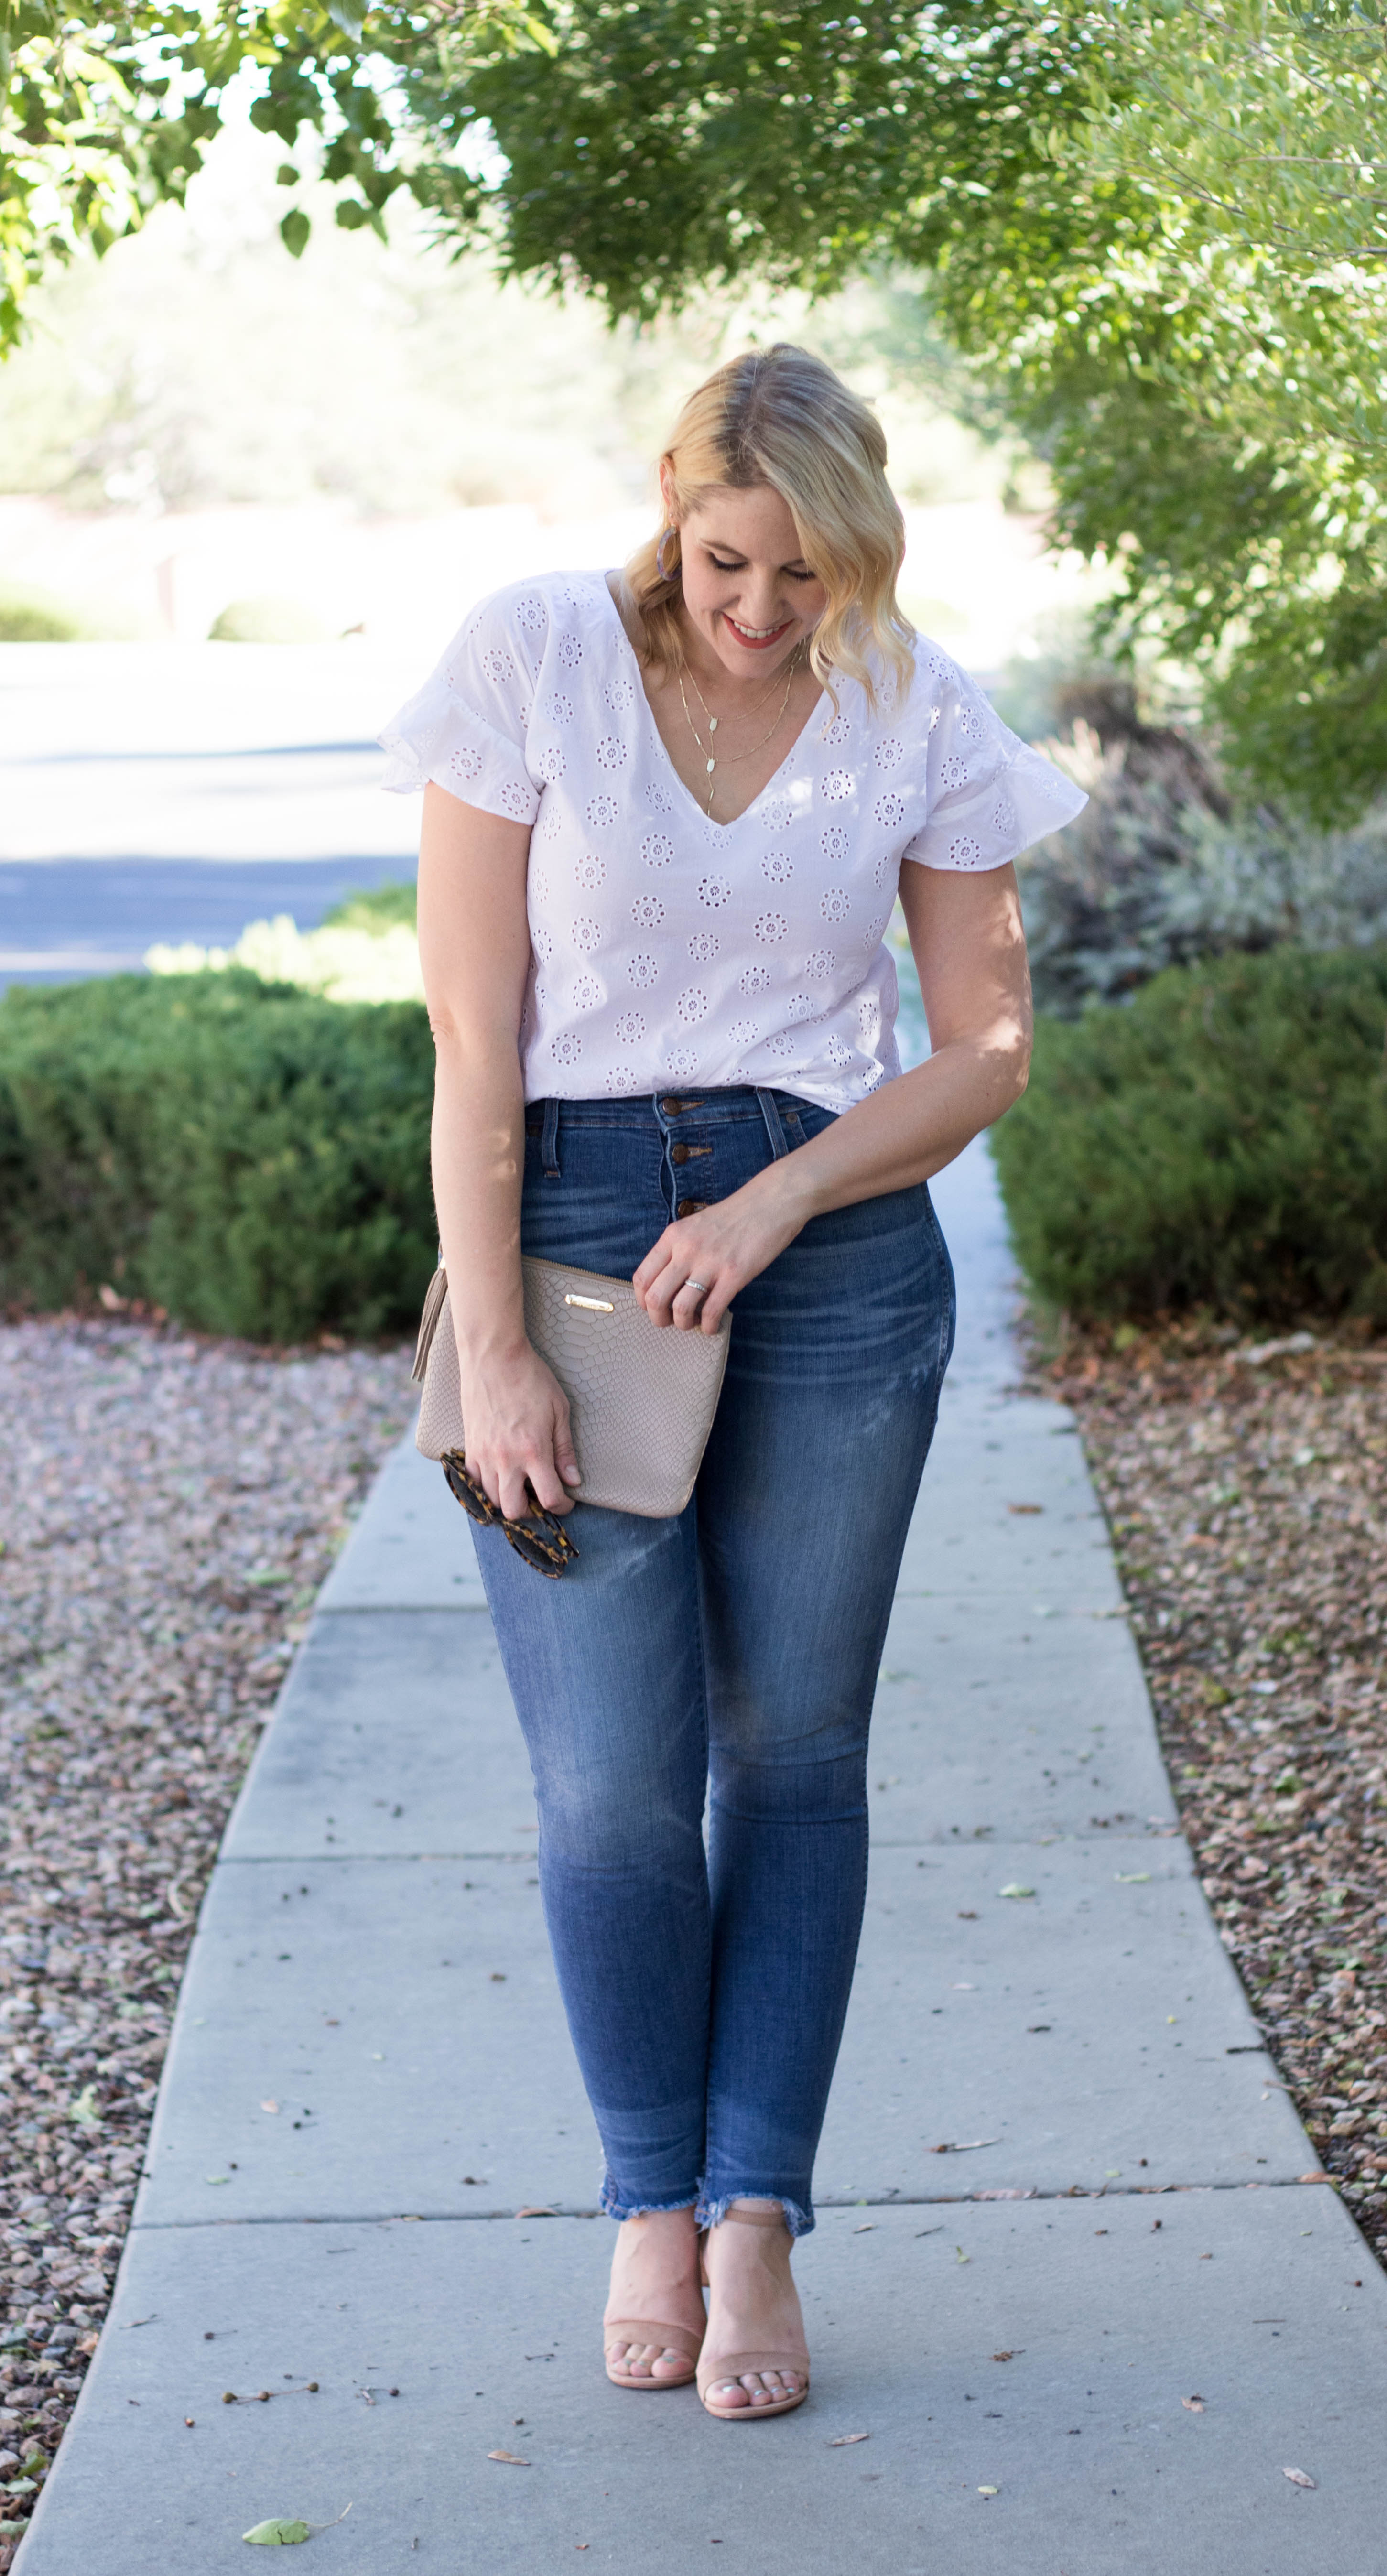 madewell top and jeans outfit #madewell #madewelljeans #curvyfashion